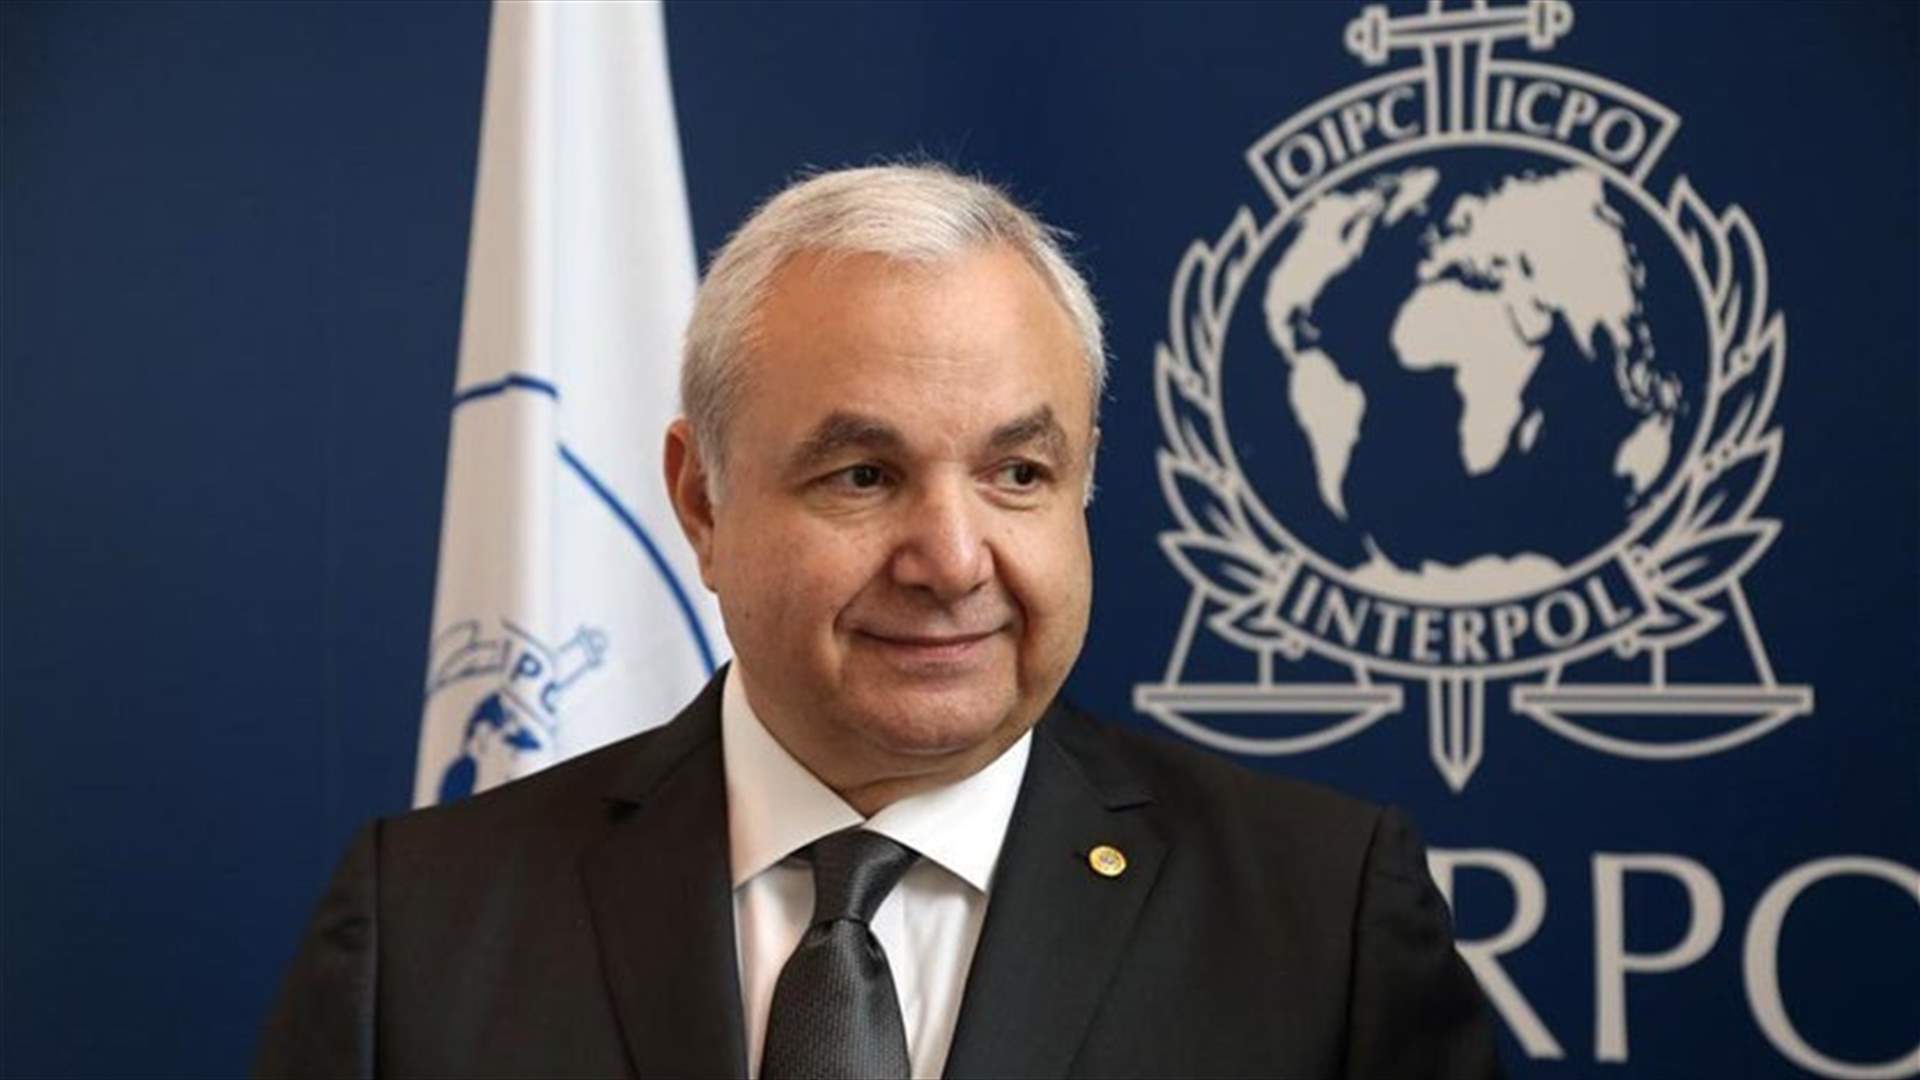 Elias al-Murr reelected as Head of the Interpol Foundation for a second term